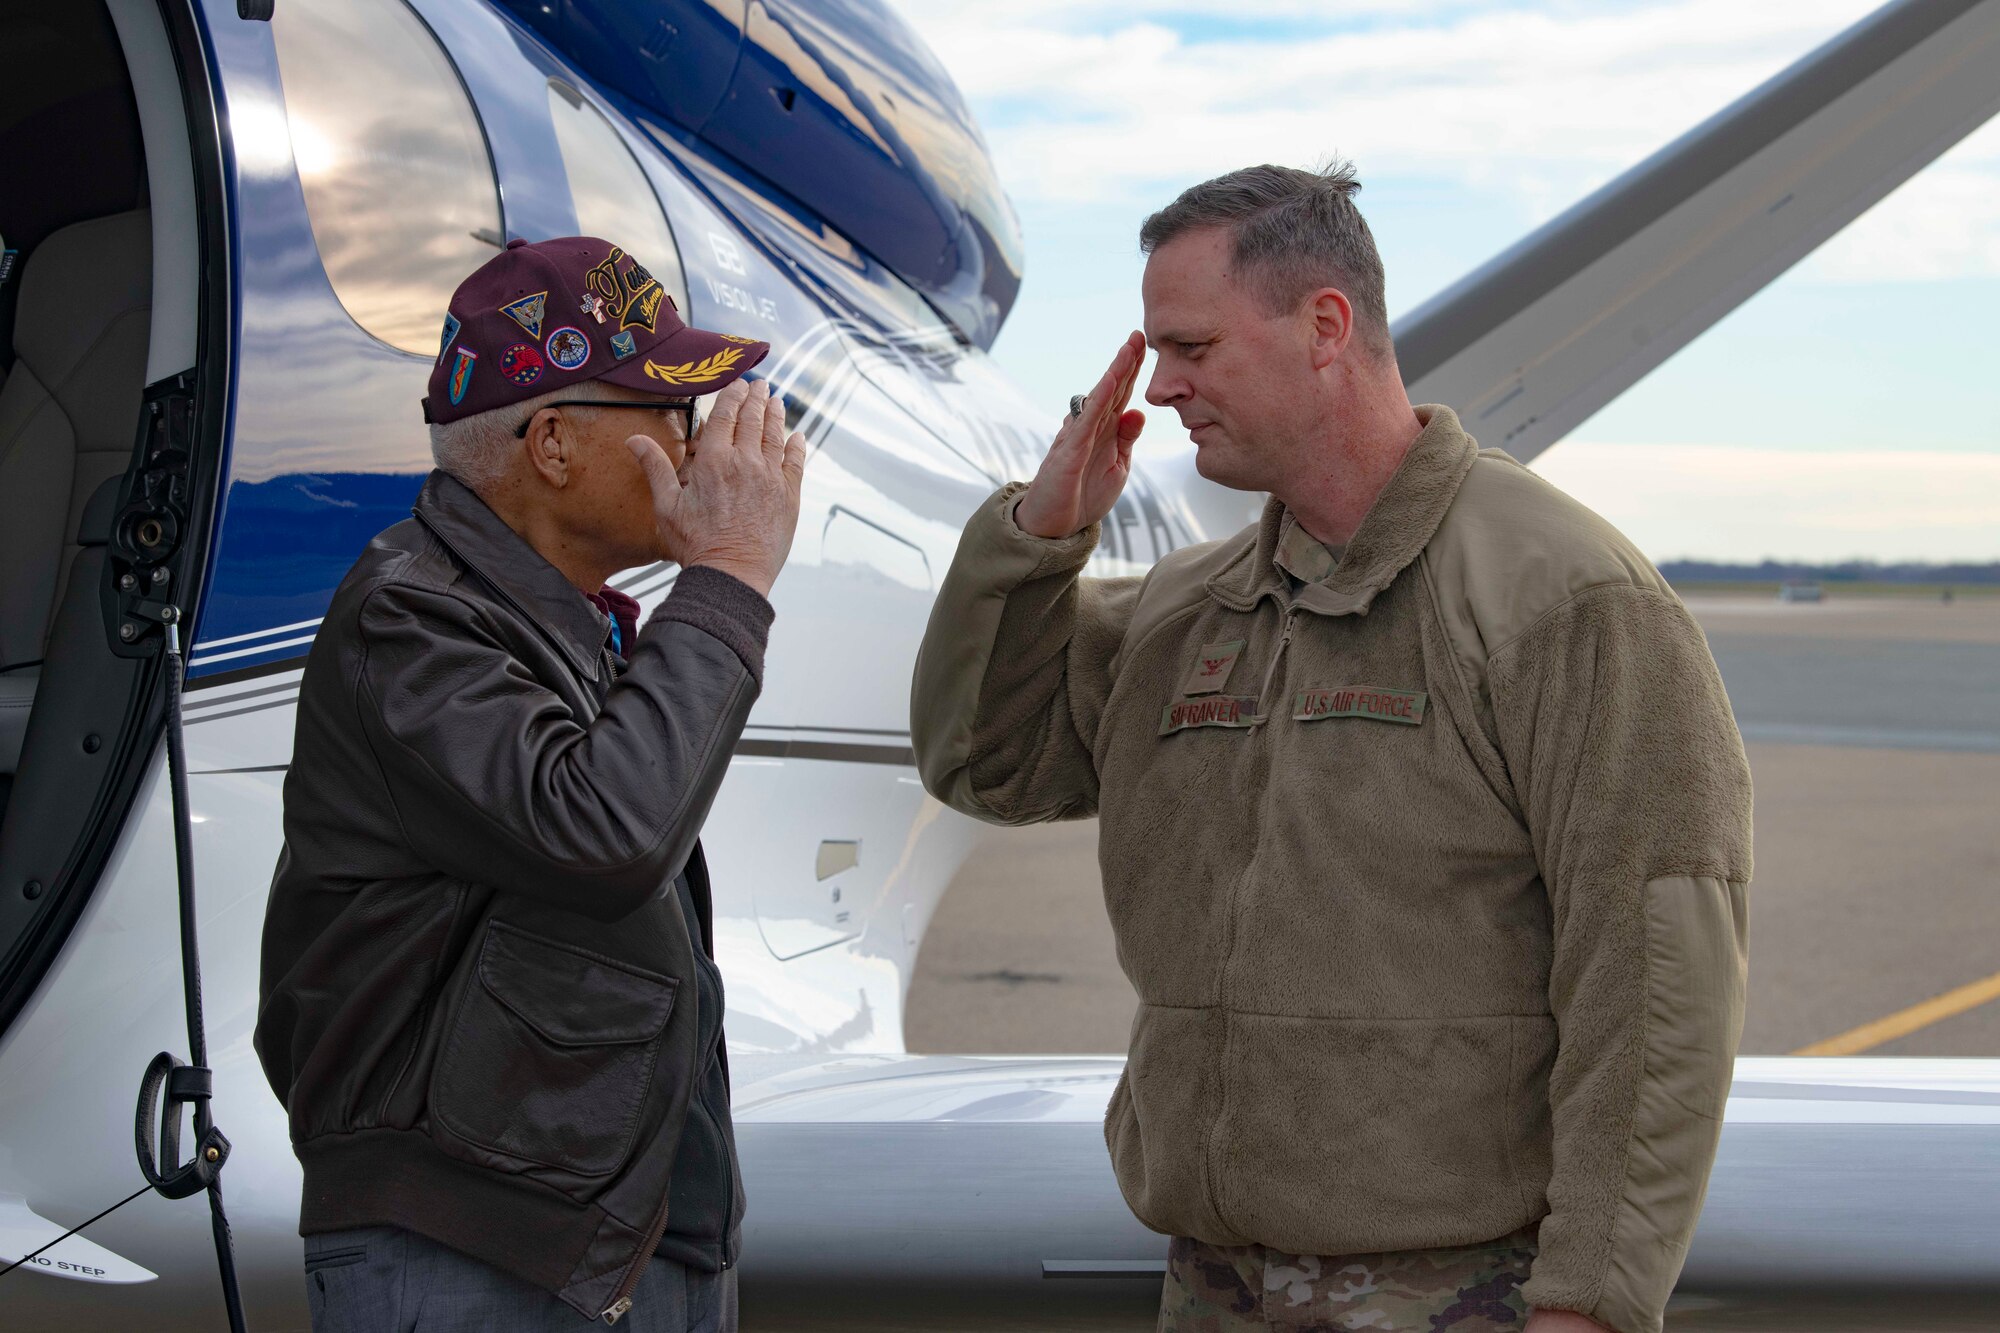 Former Tuskegee Airman, retired Col. Charles McGee, and 436th Airlift Wing commander Col. Joel Safranek exchange a salute during his visit Dec. 6, 2019, at Dover Air Force Base, Del. He served a total of 30 years in the U.S. Air Force, beginning with the U.S. Army Air Corps, and flew a total of 409 combat missions in World War II, Korea and Vietnam. The Tuskegee program began in 1941 when the 99th Pursuit Squadron was established, and its Airmen were the first ever African-American military aviators in the U.S. Army Air Corps. (U.S. Air Force photo by Senior Airman Christopher Quail)